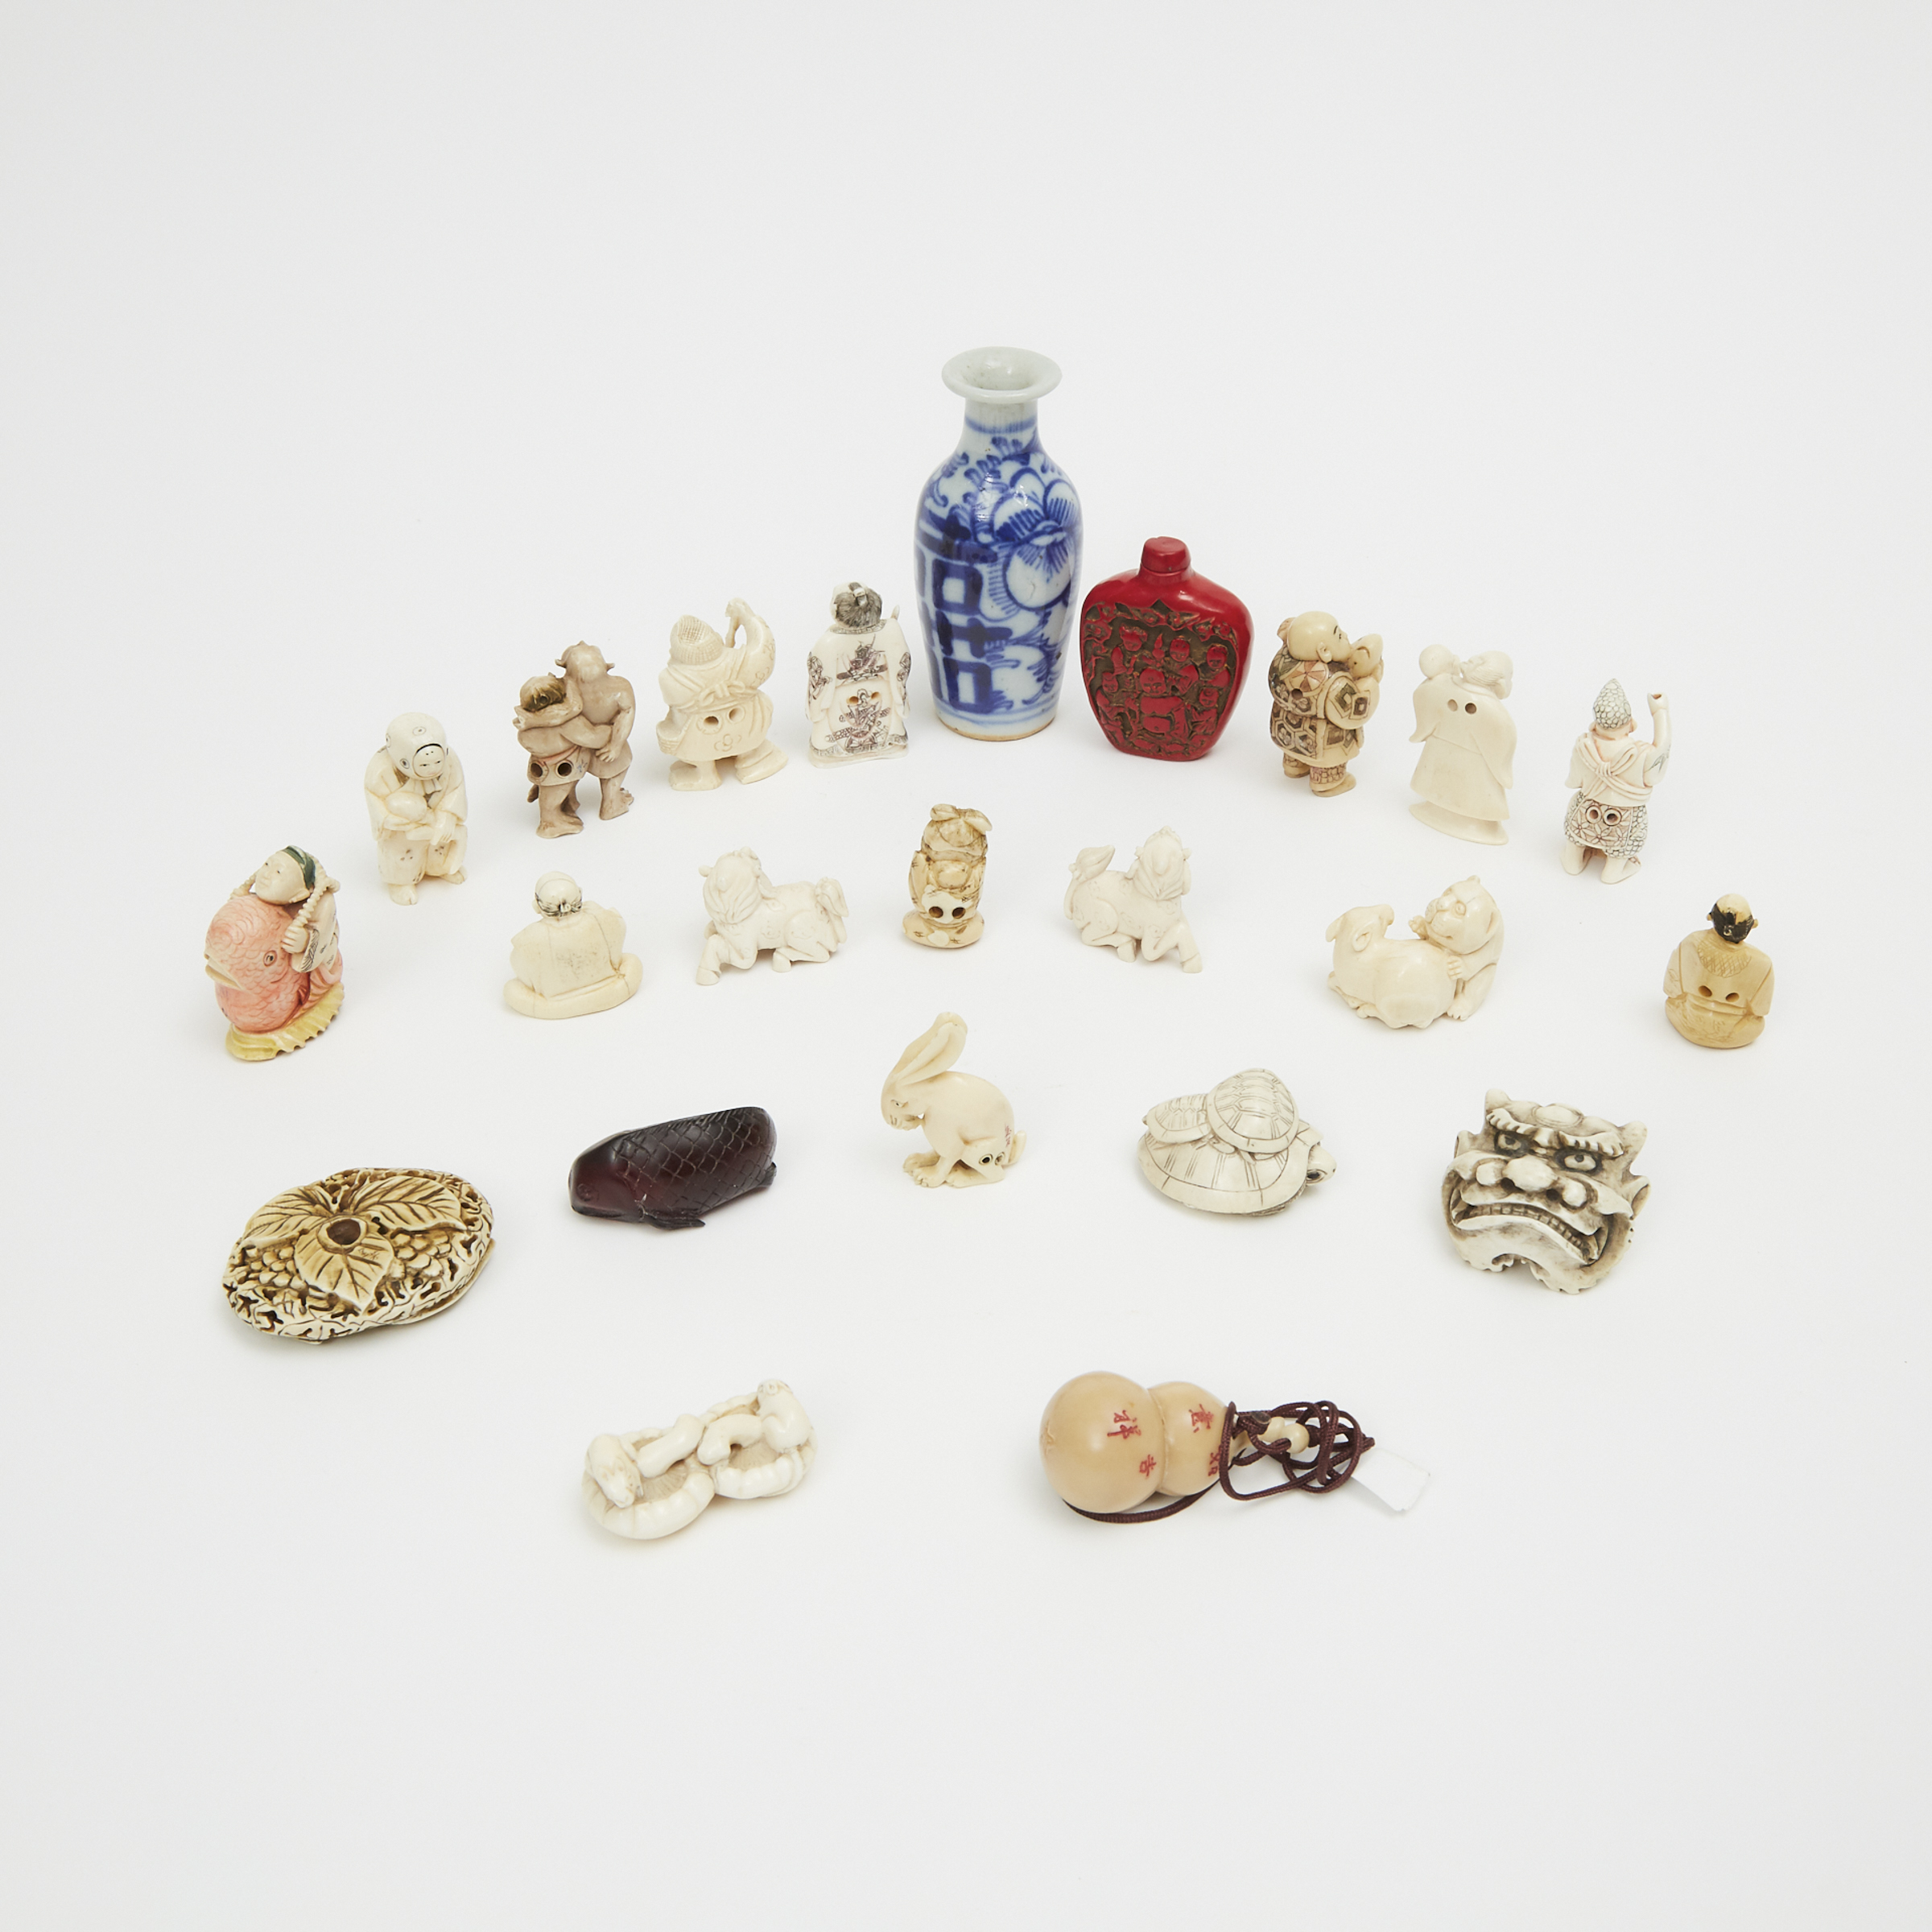 A Group of Twenty-Three Small Ivory, Ivorine, Wood and Ceramic Japanese and Chinese Items